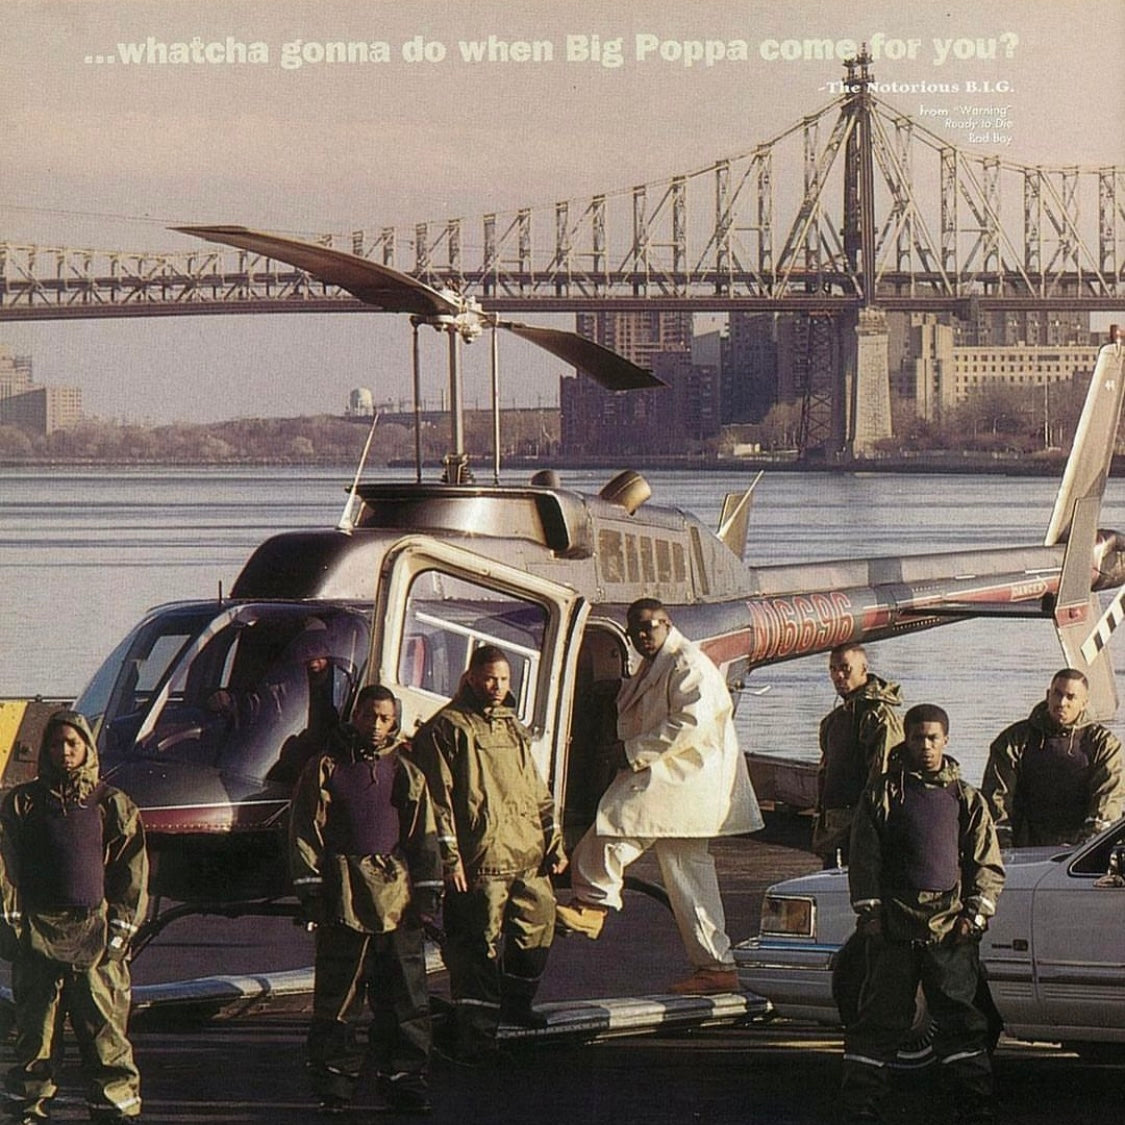 "The Notorious BIG / "...whatcha gonna do when Big Poppa come for you" Poster